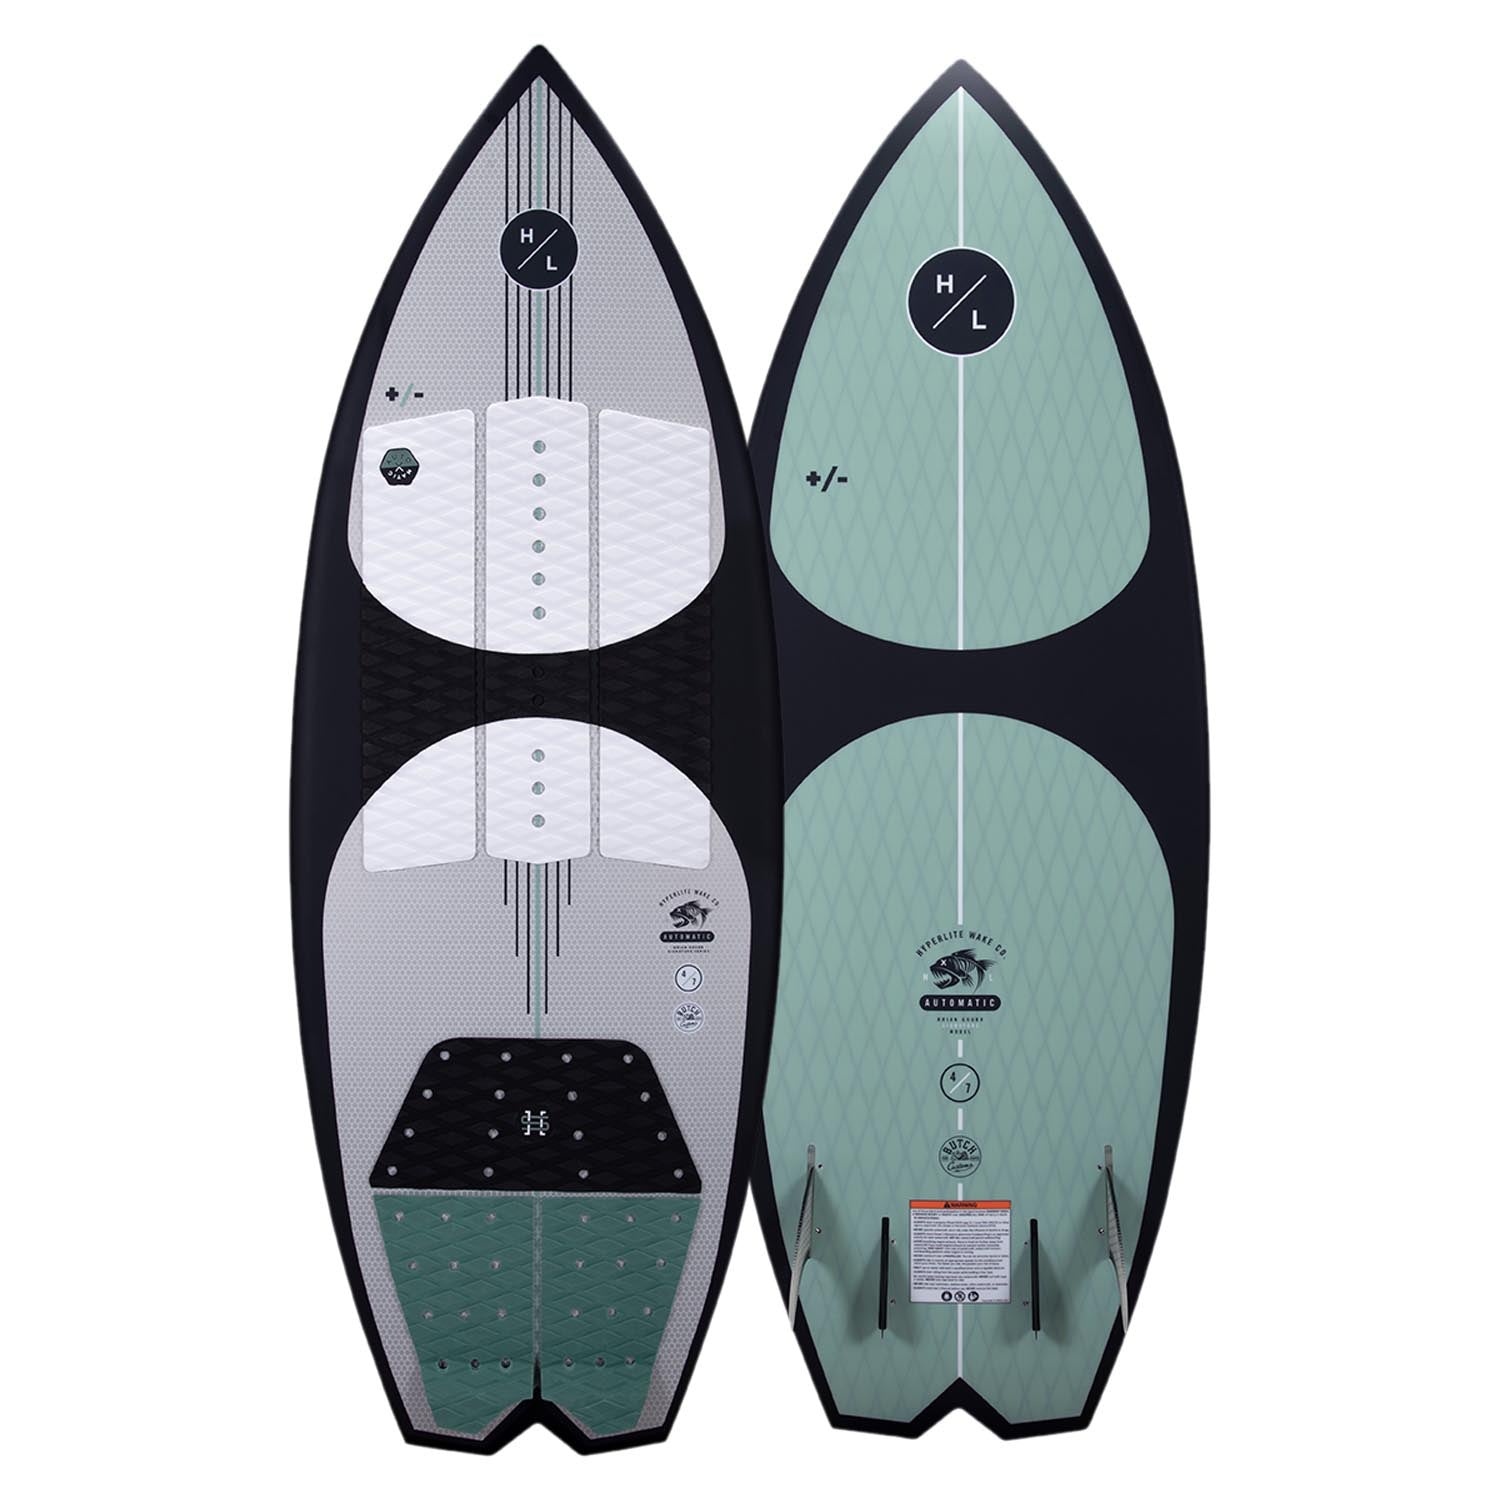 A Hyperlite wakeboard with a surf vibe design in green and black.